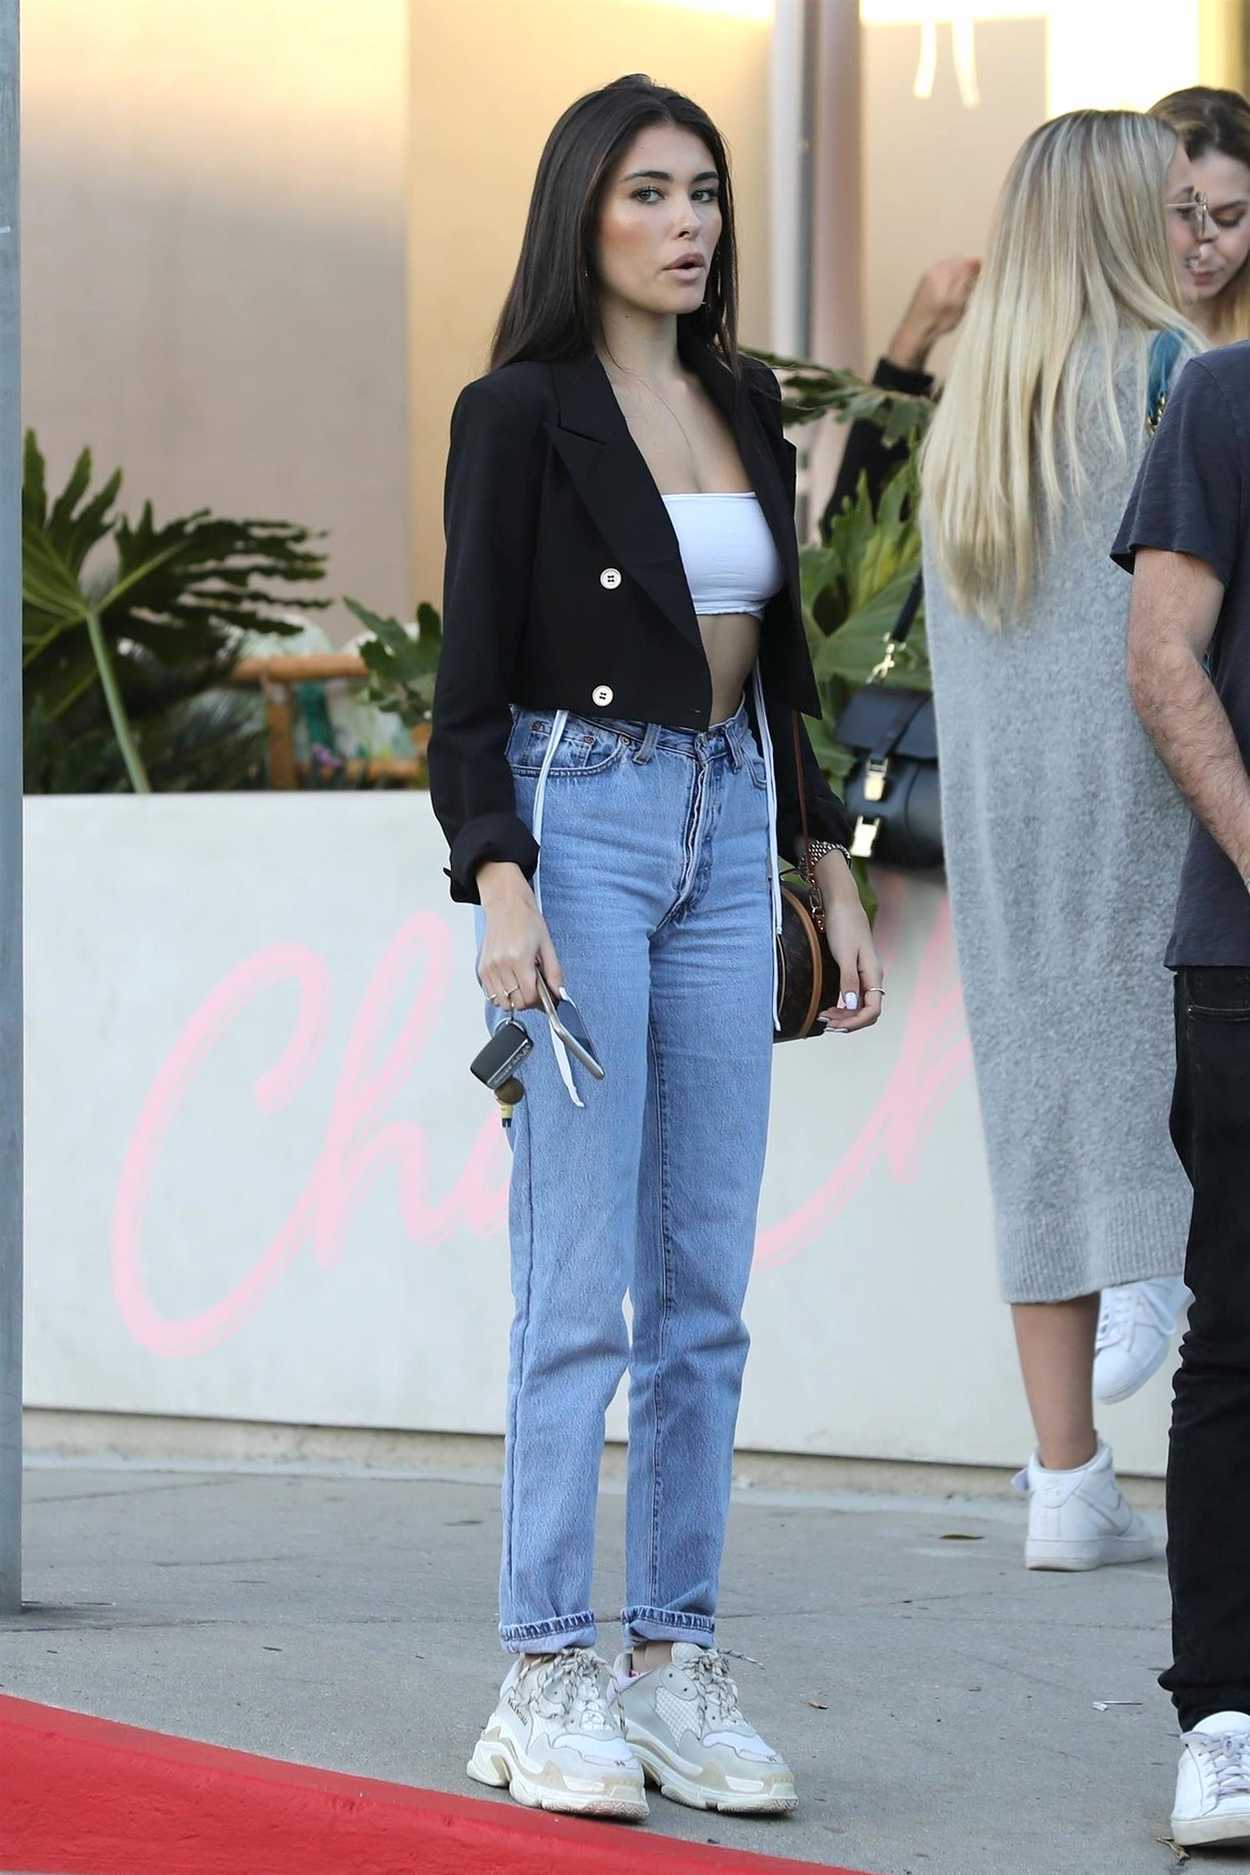 Singer Madison Beer wearing Re/Done jeans & a Louis Vuitton belt in Beverly  Hills. #streetfashion #spottedceleb